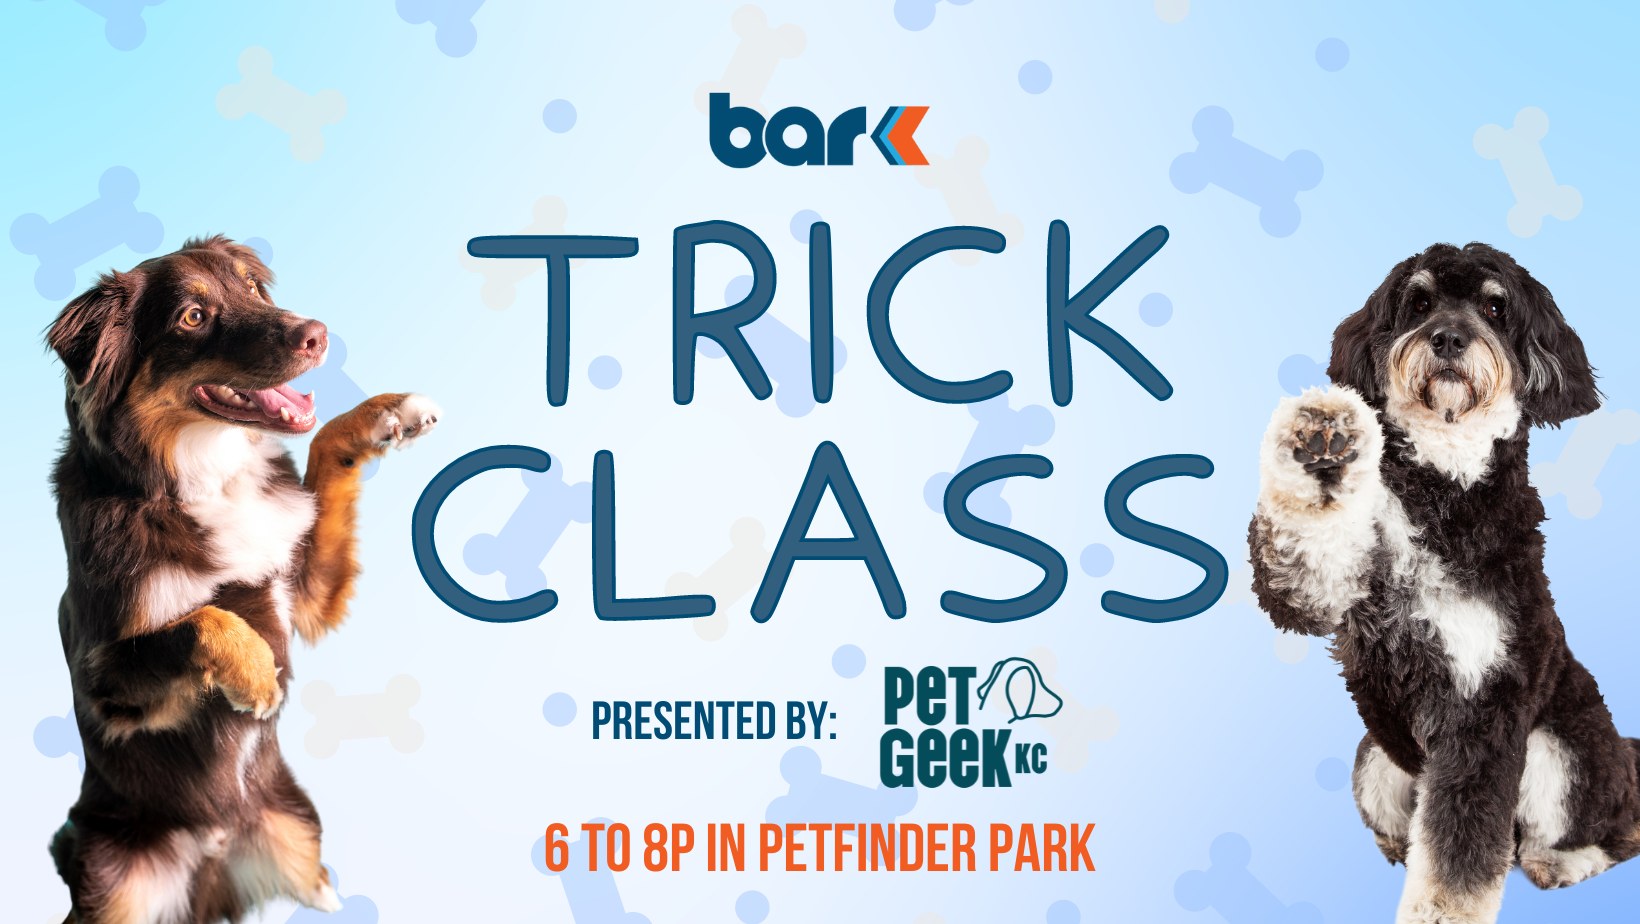 bar k trick class presented by pet geek kc 6 to 8pm in petfinder park